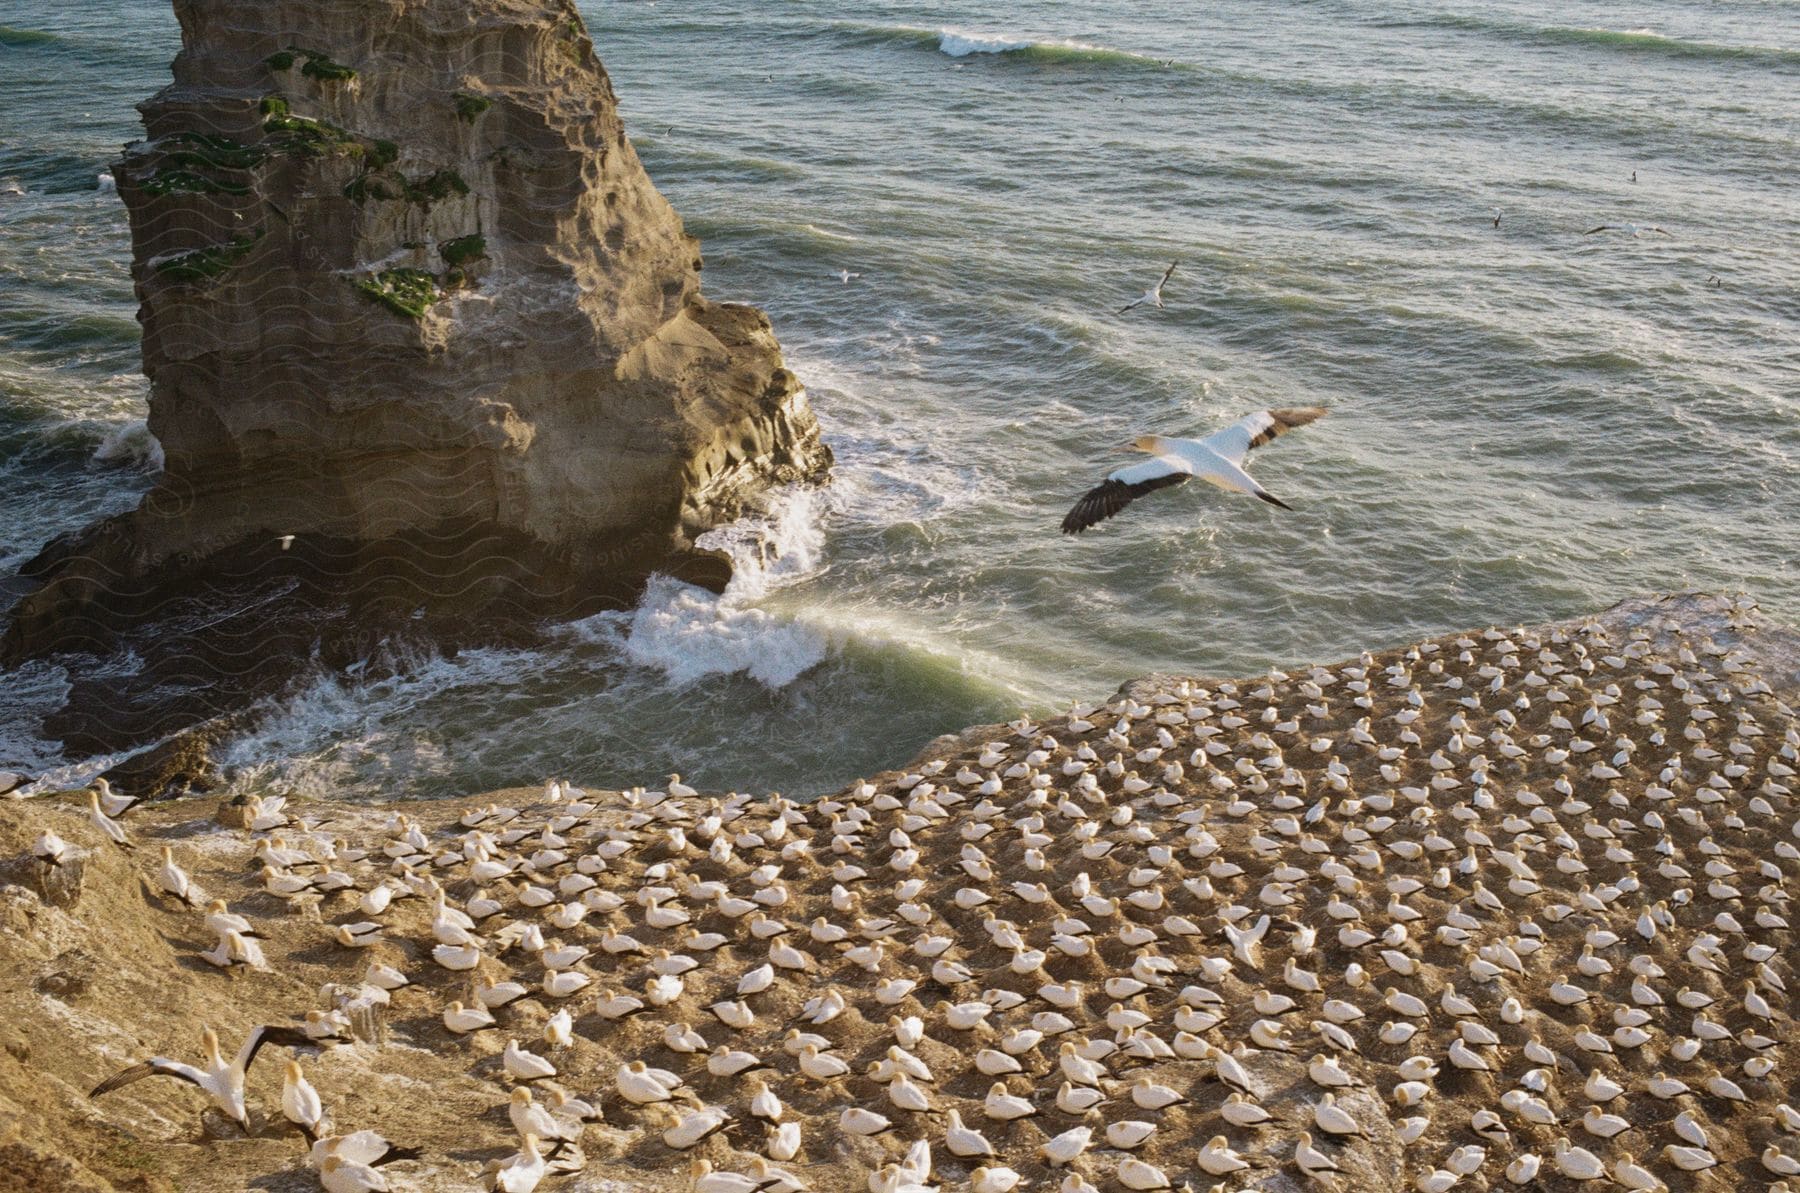 A white bird flying over a flock of nesting birds in the sand near the ocean as waves crash against a rock formation